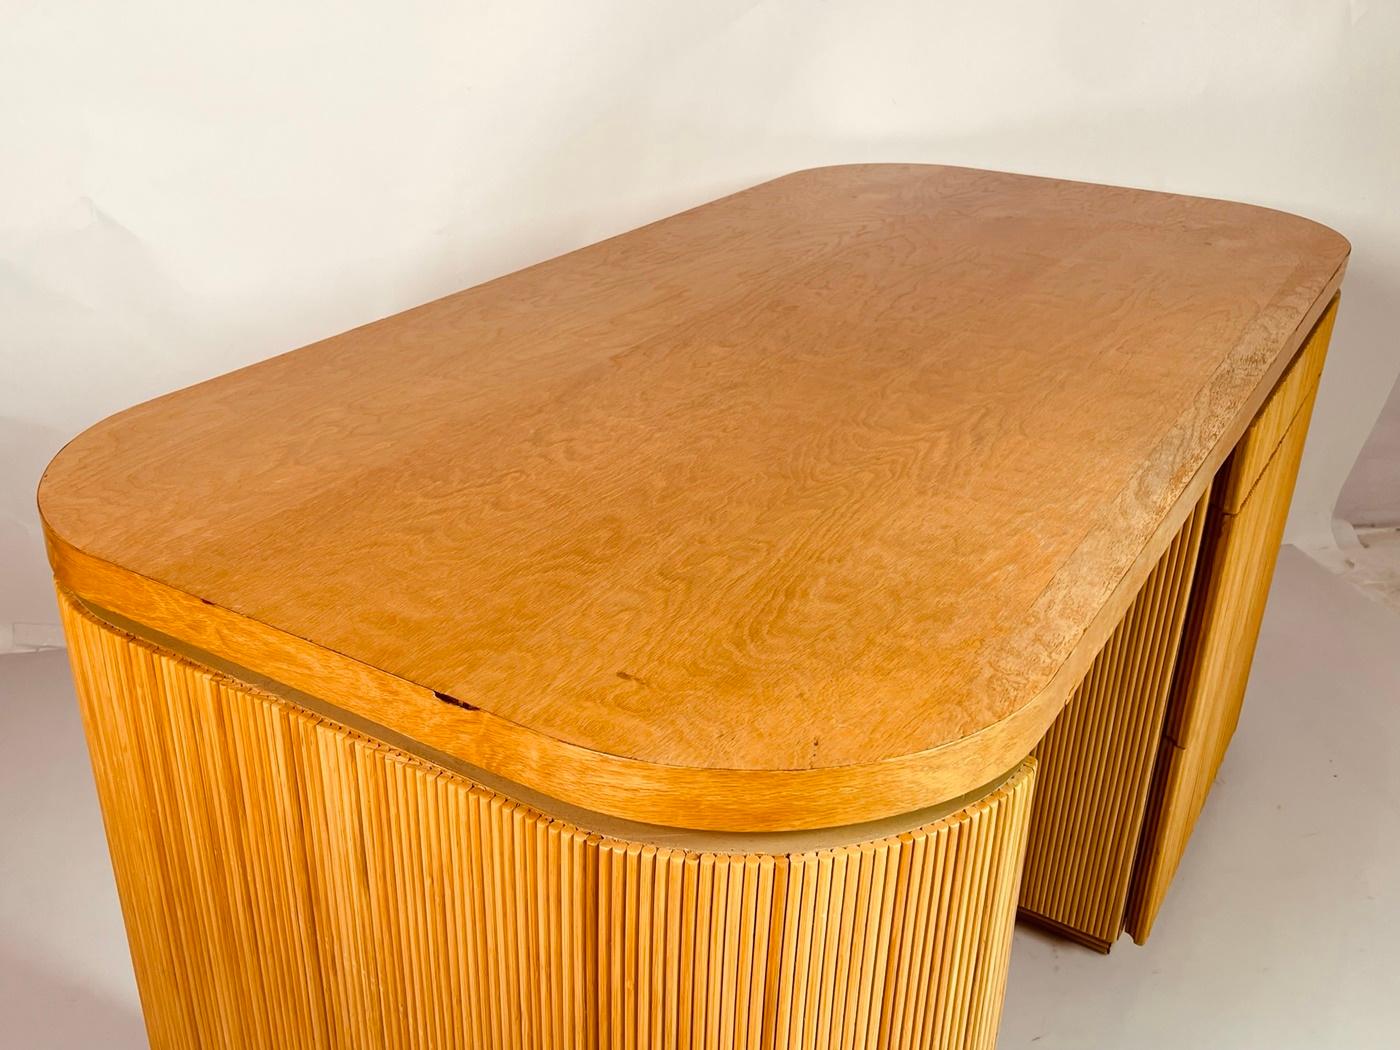 Pencil Reed Executive Desk in the Style of Karl Springer, USA 1970's For Sale 4